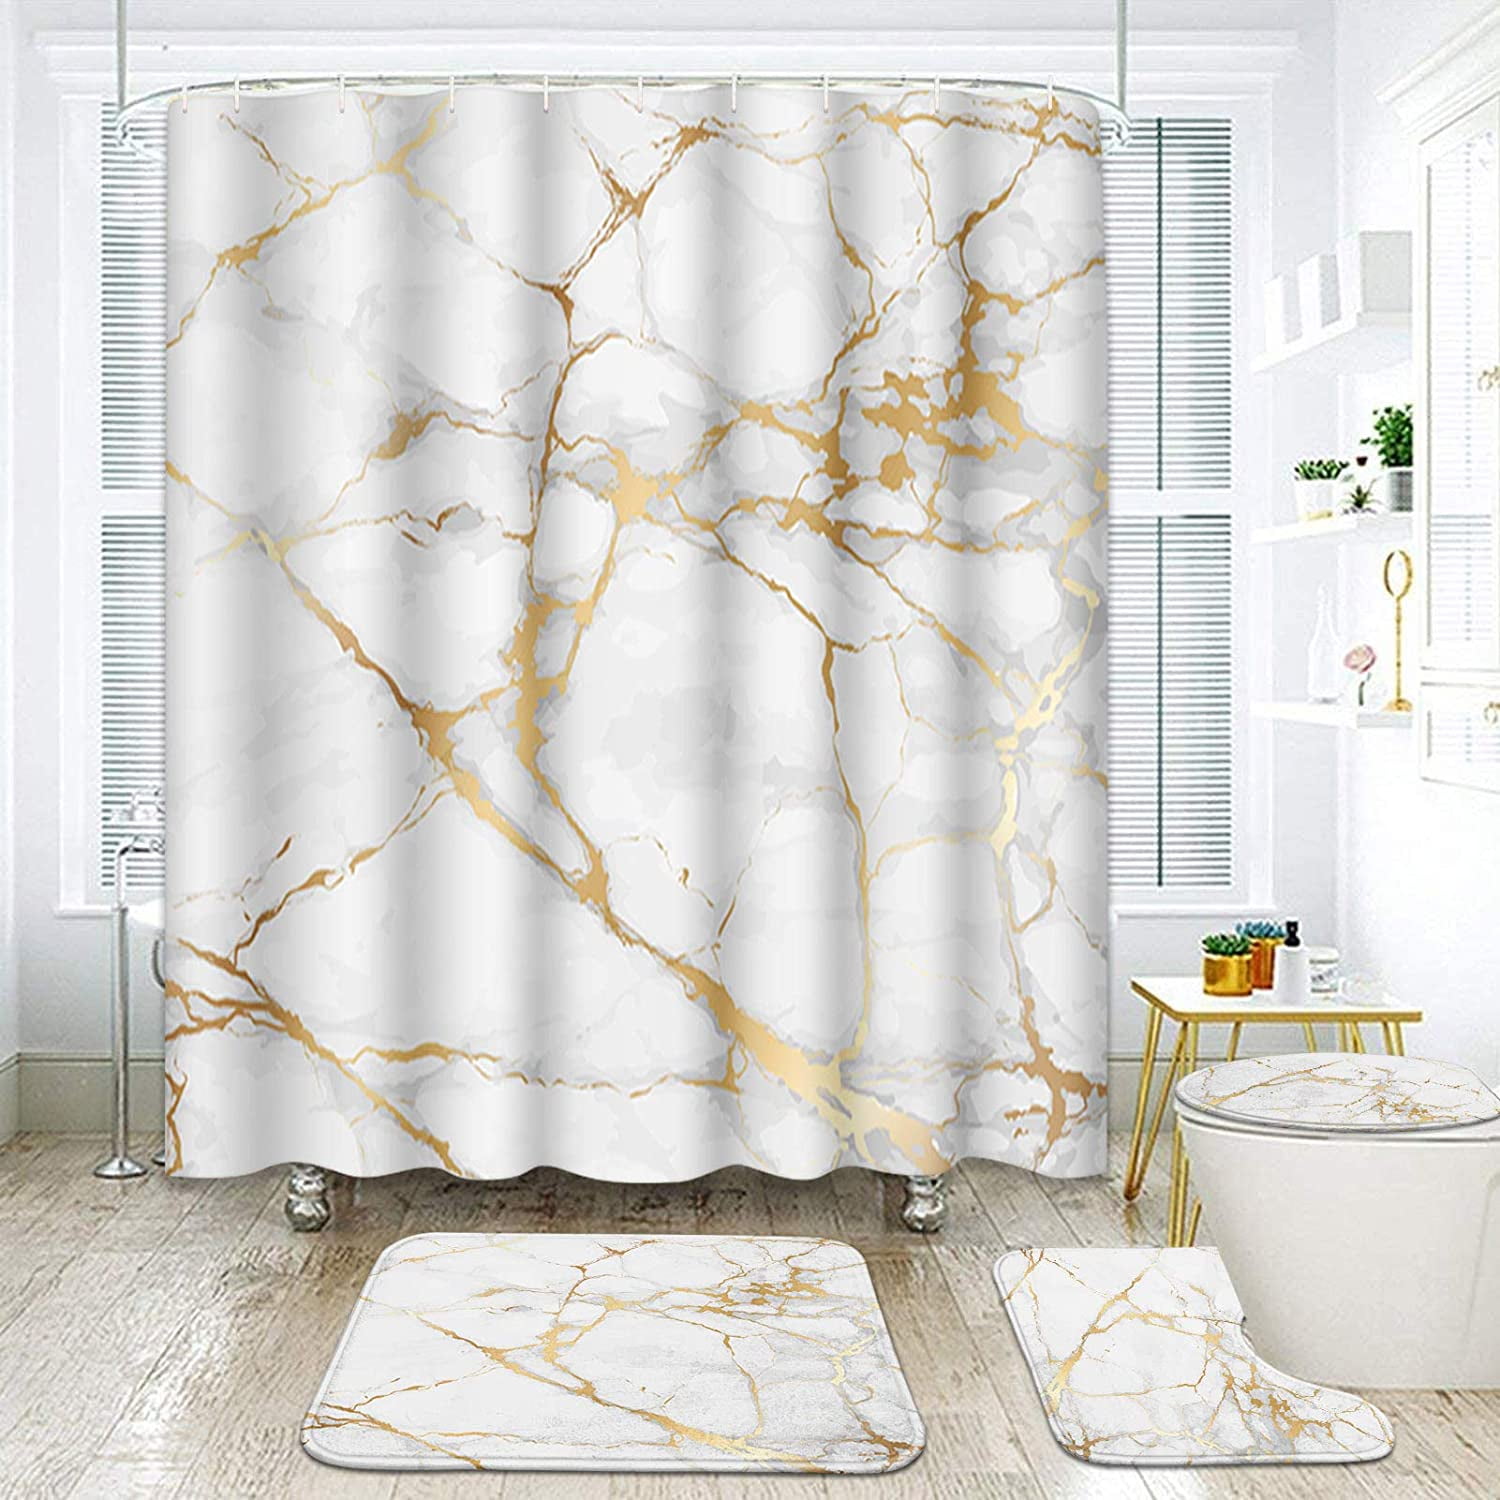 4 Pcs Marble Shower Curtain Sets with Non-Slip Rug Toilet Lid Cover and Bath Mat 